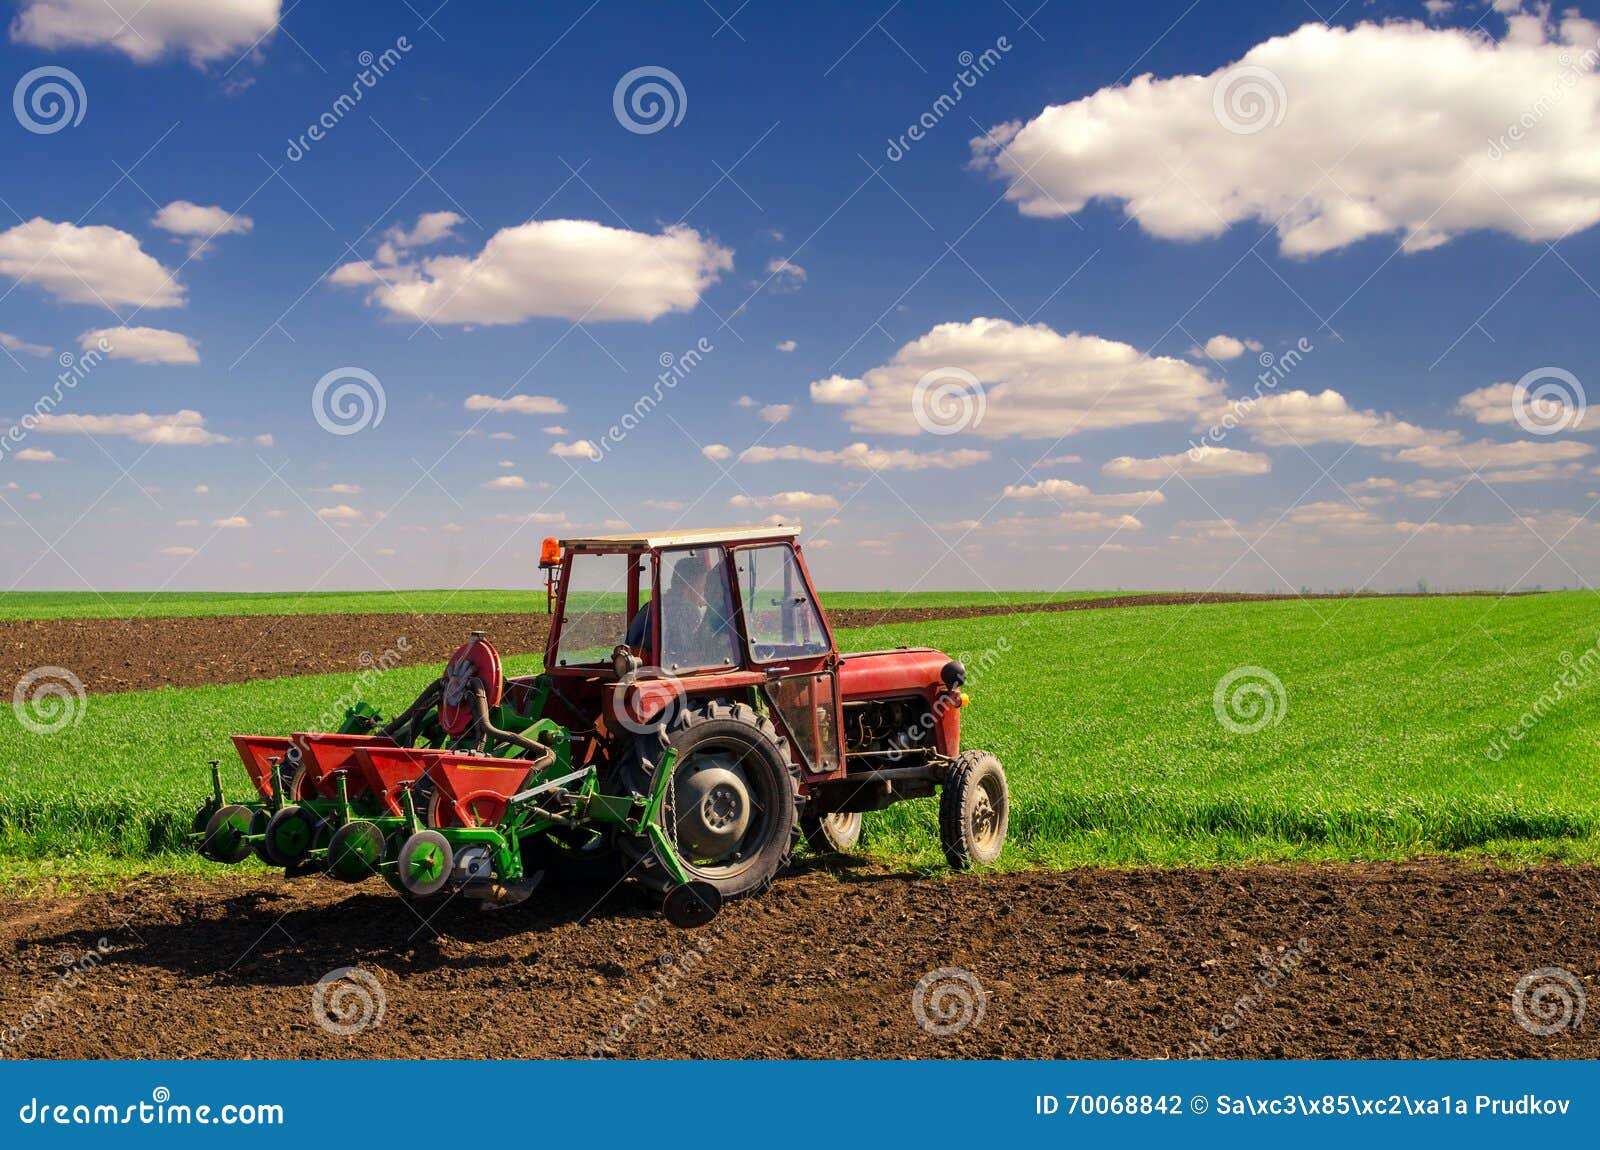 farmer with tractor sowing on agricultural fields in spring